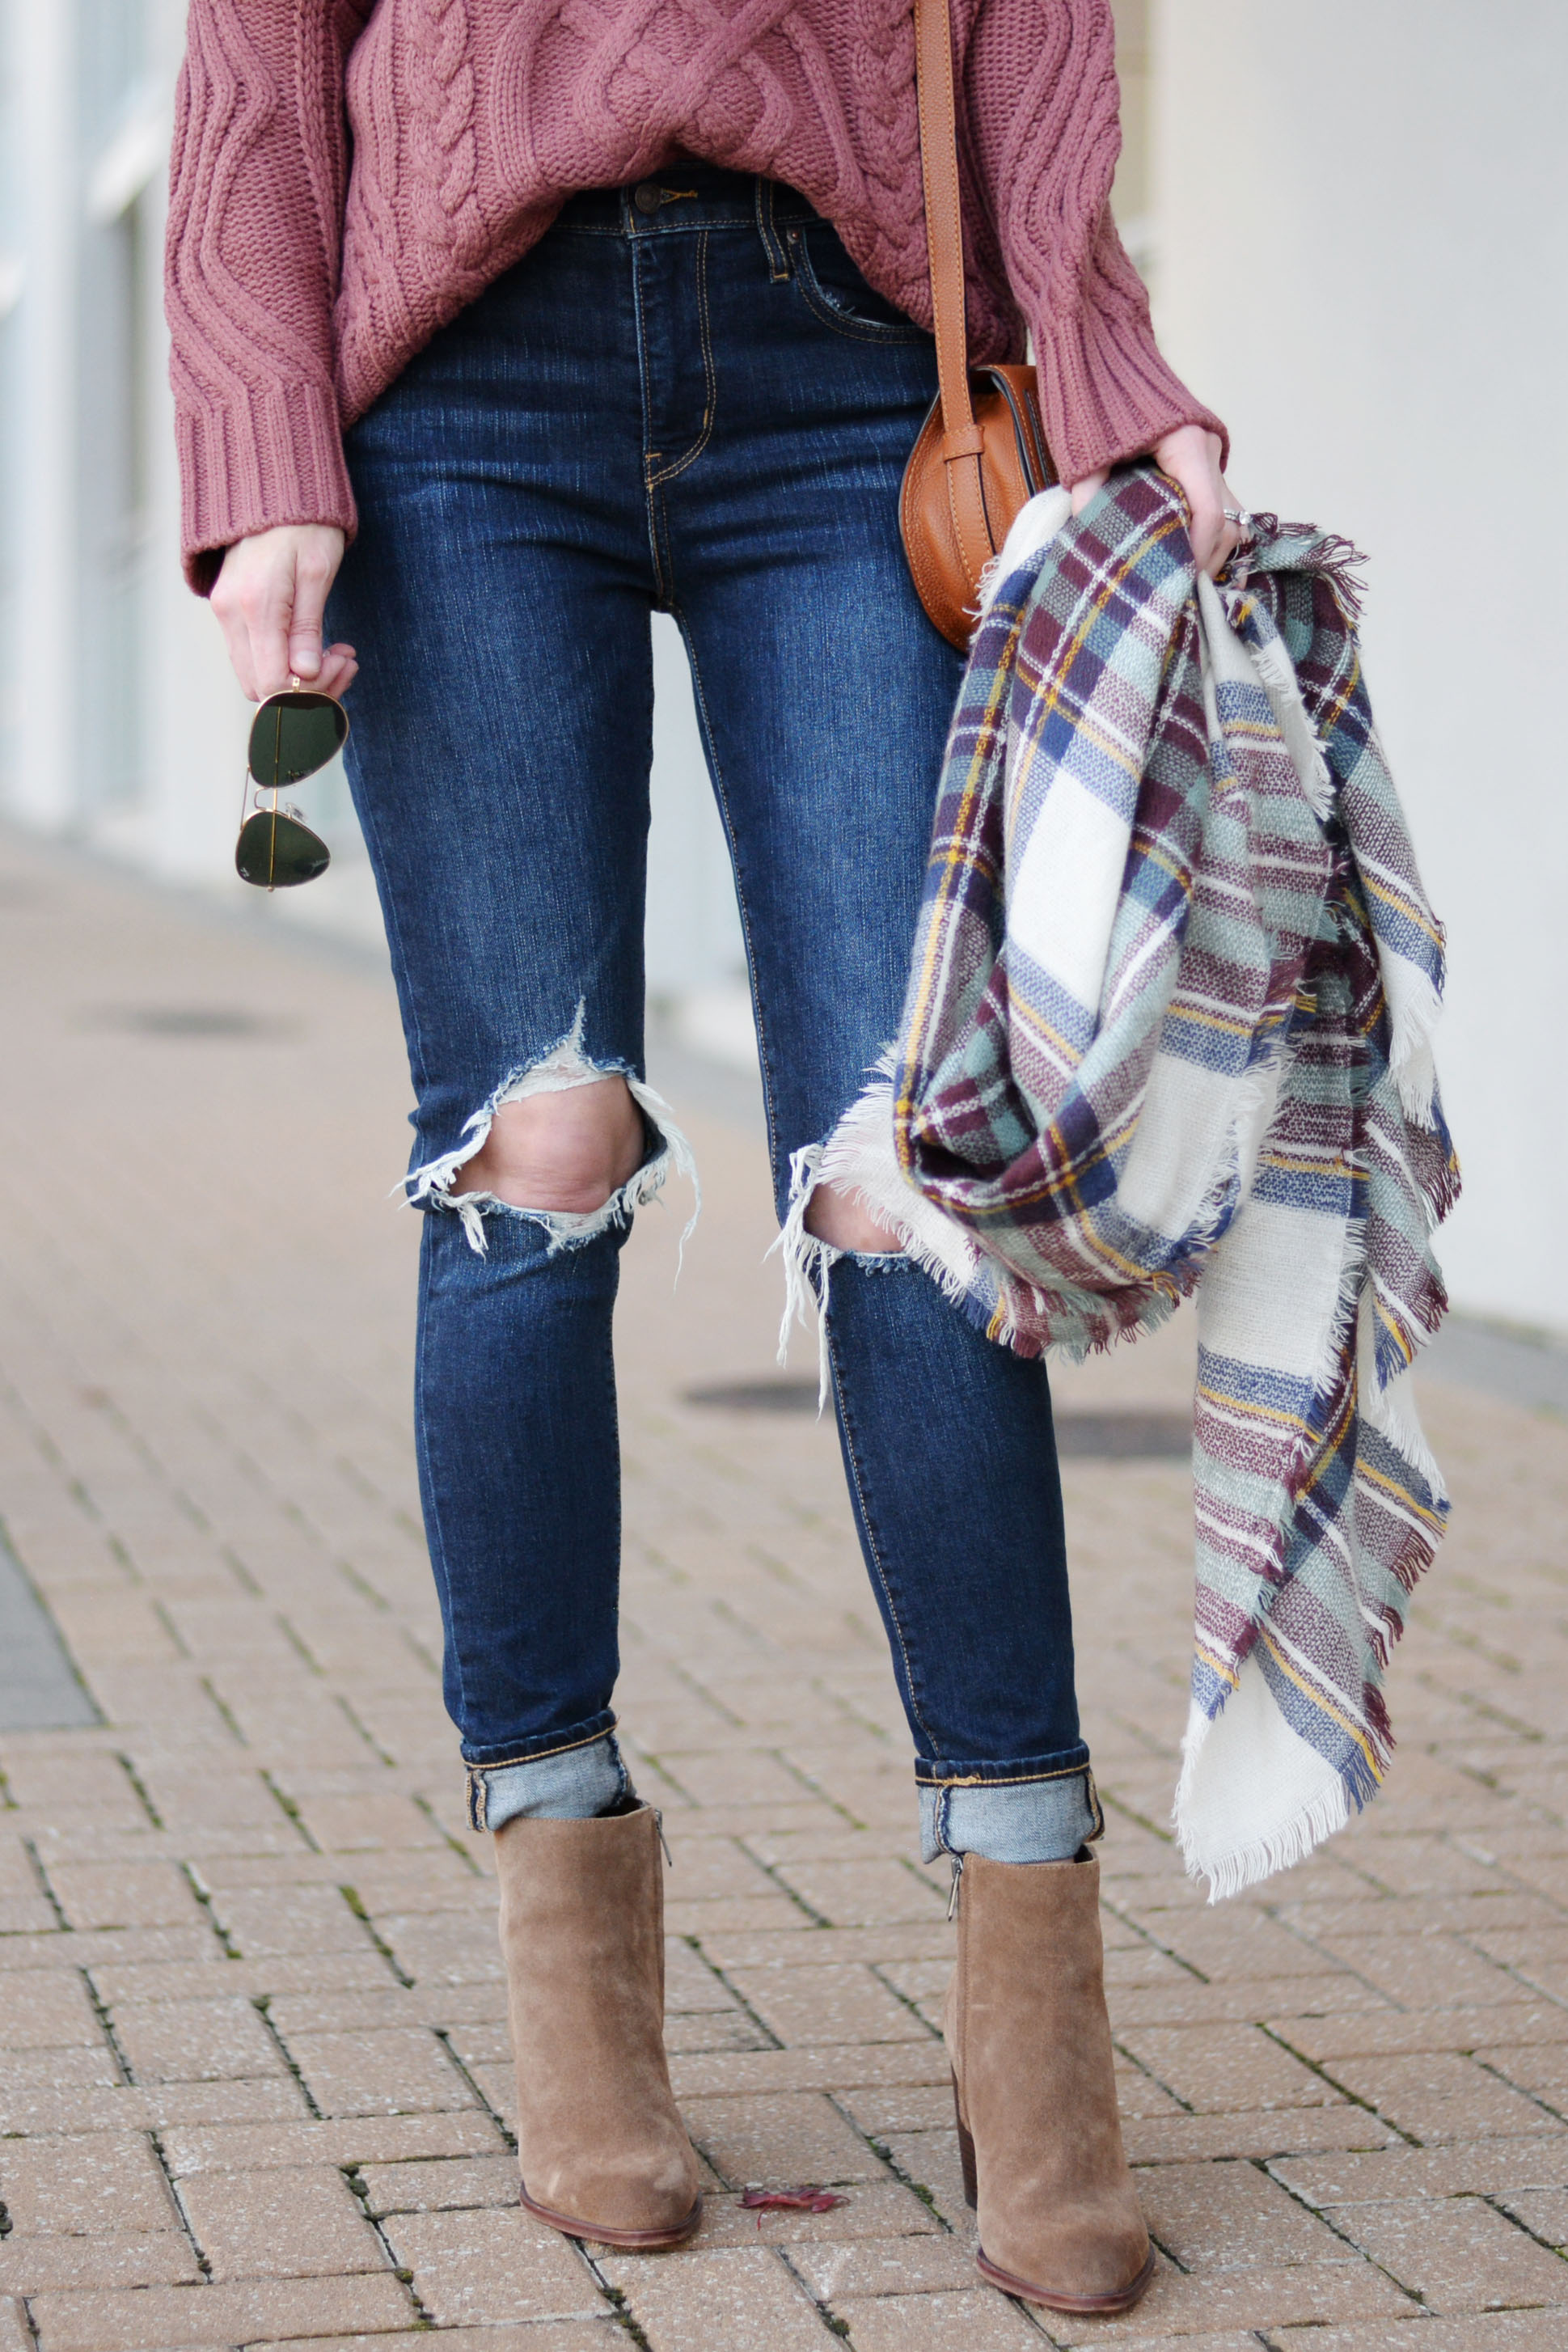 How to Wear Ankle Boots and Jeans